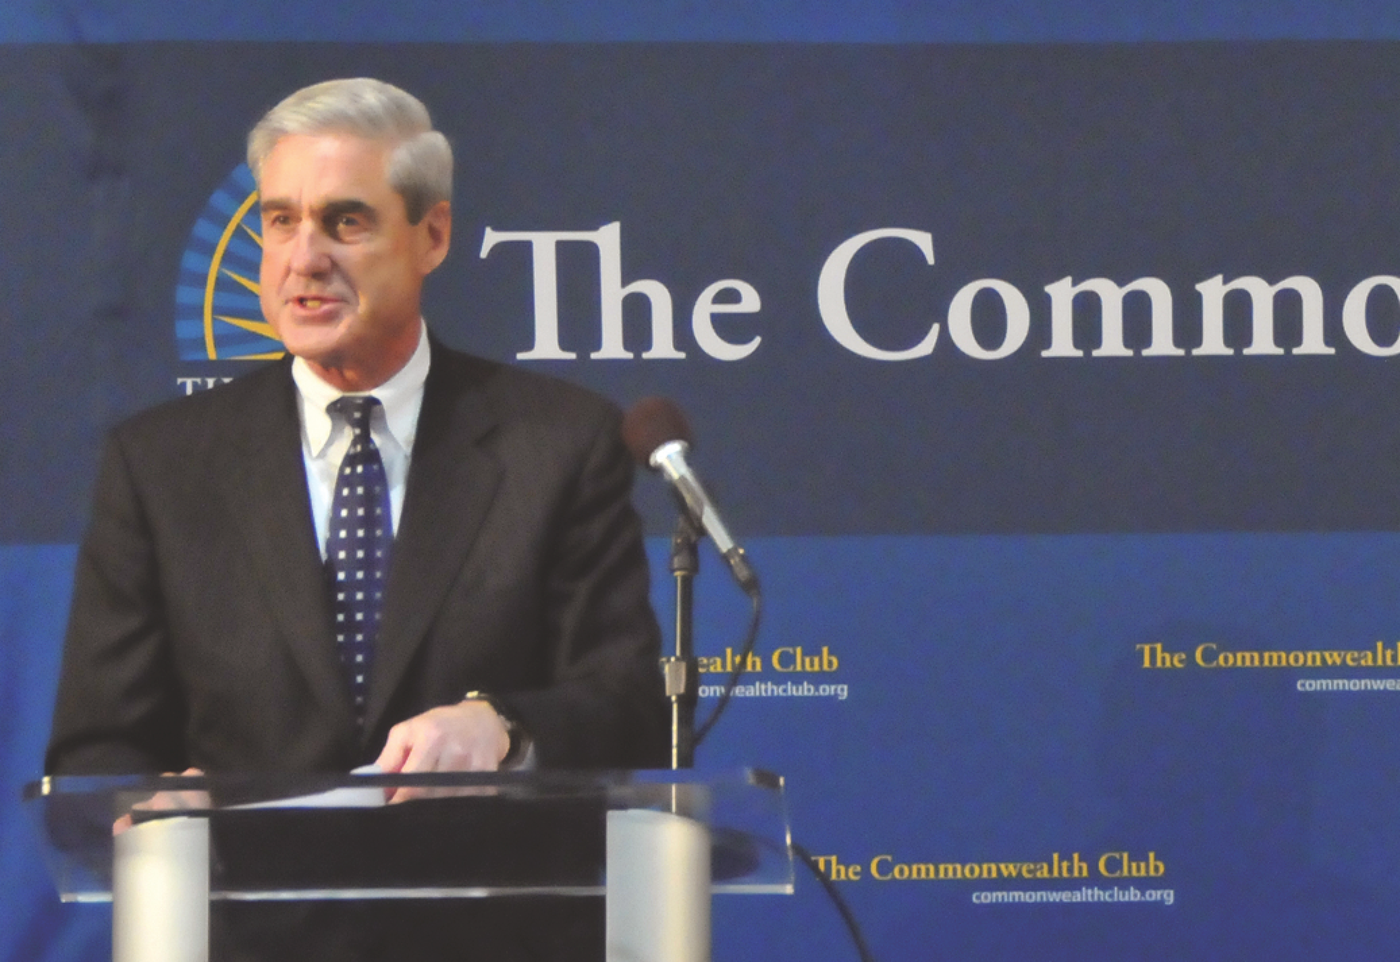 Director Mueller Delivers Speech on National Security